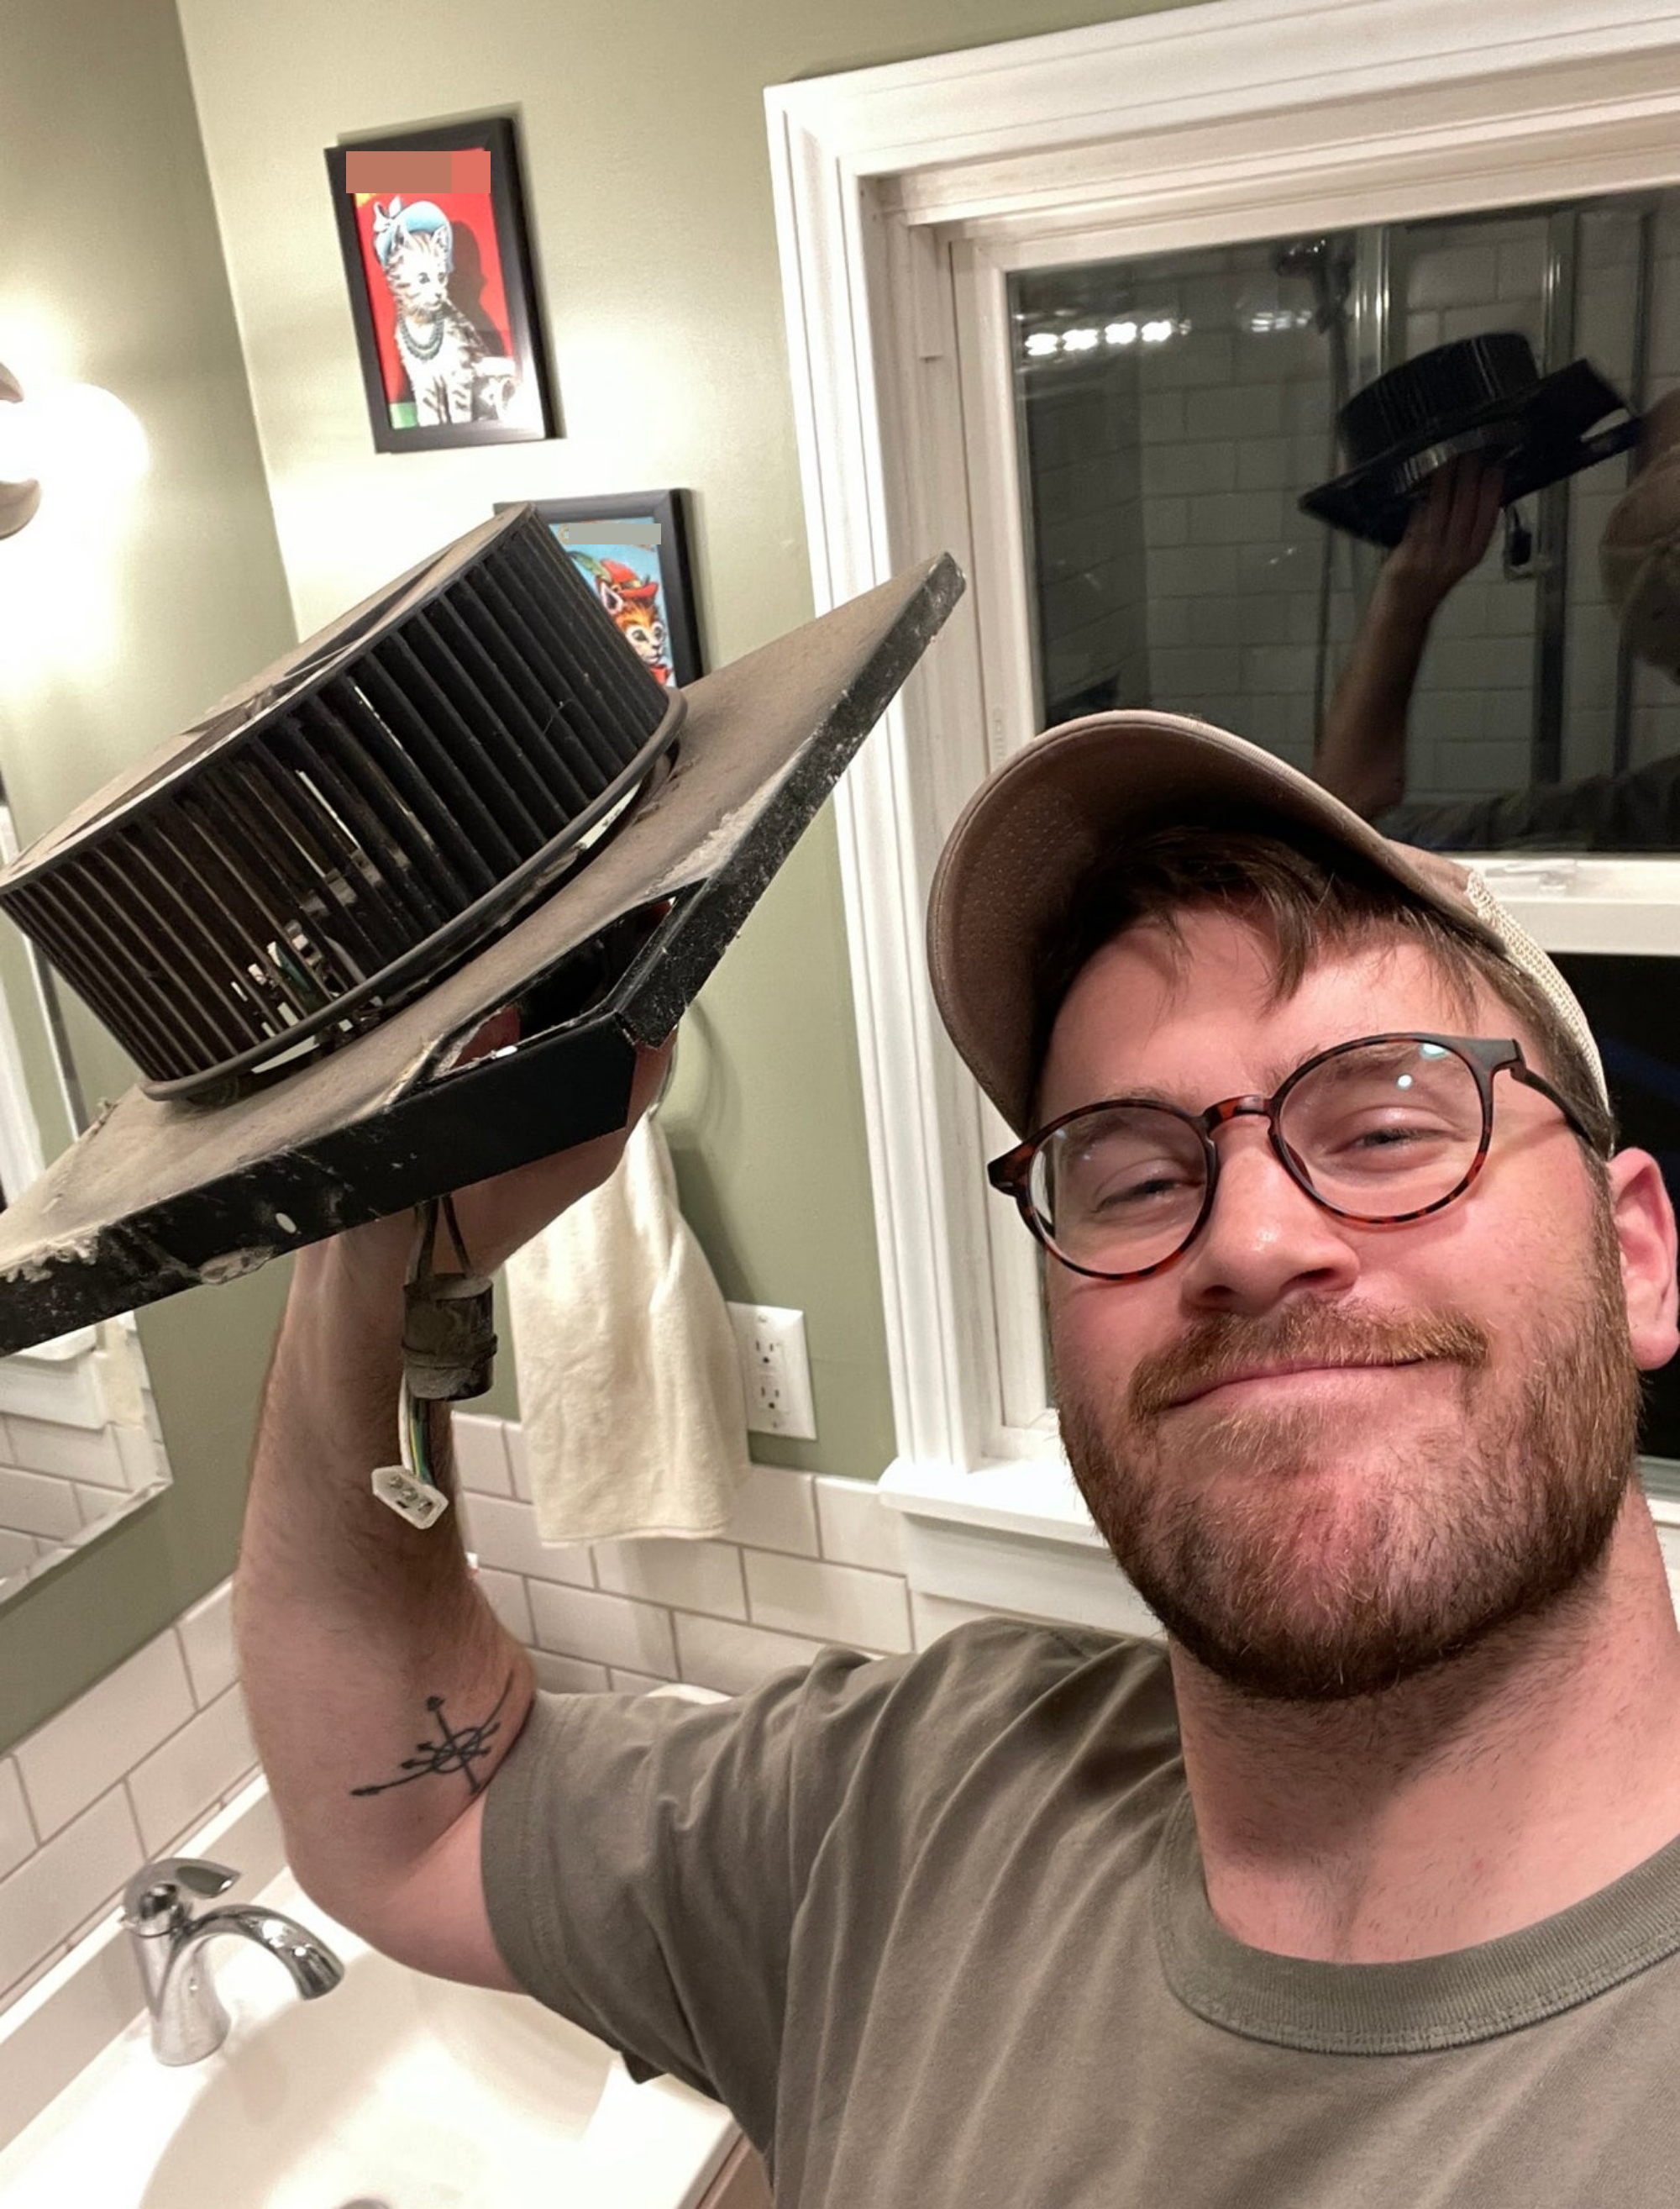 author holding up fan assembly in bathroom while replacing it